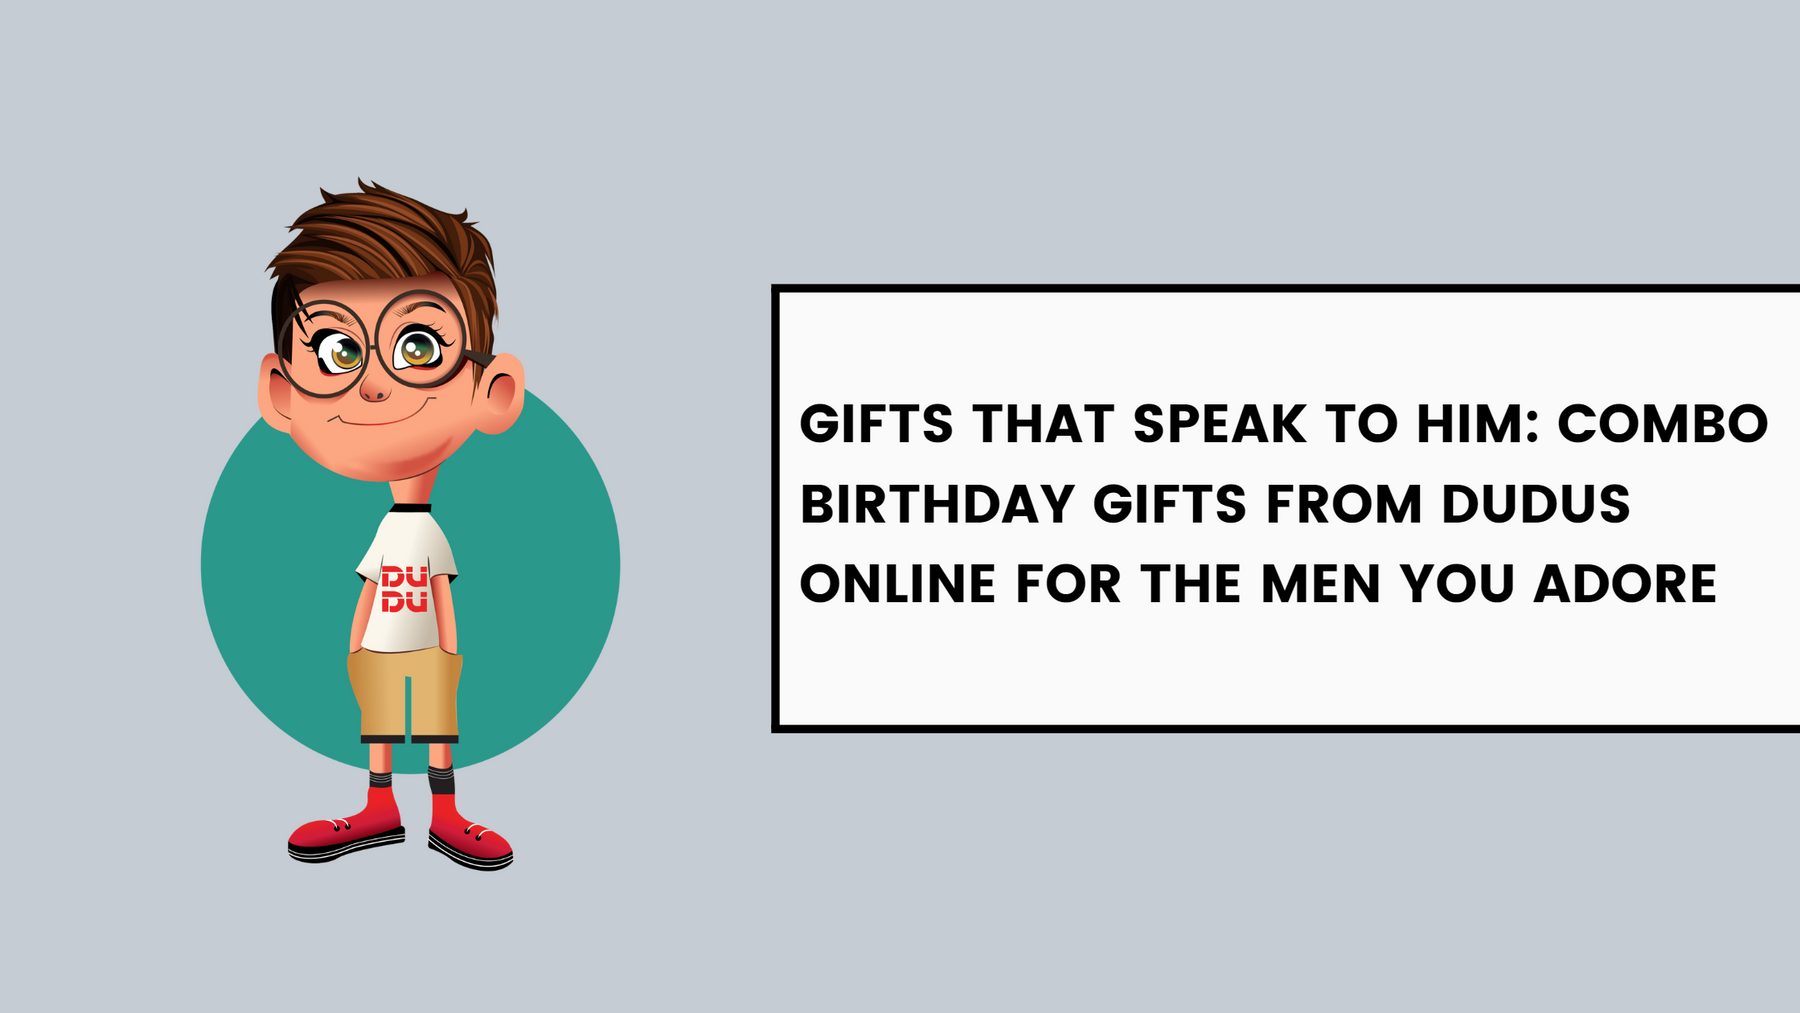 Gifts That Speak To Him: Combo Birthday Gifts From Dudus Online For The Men You Adore